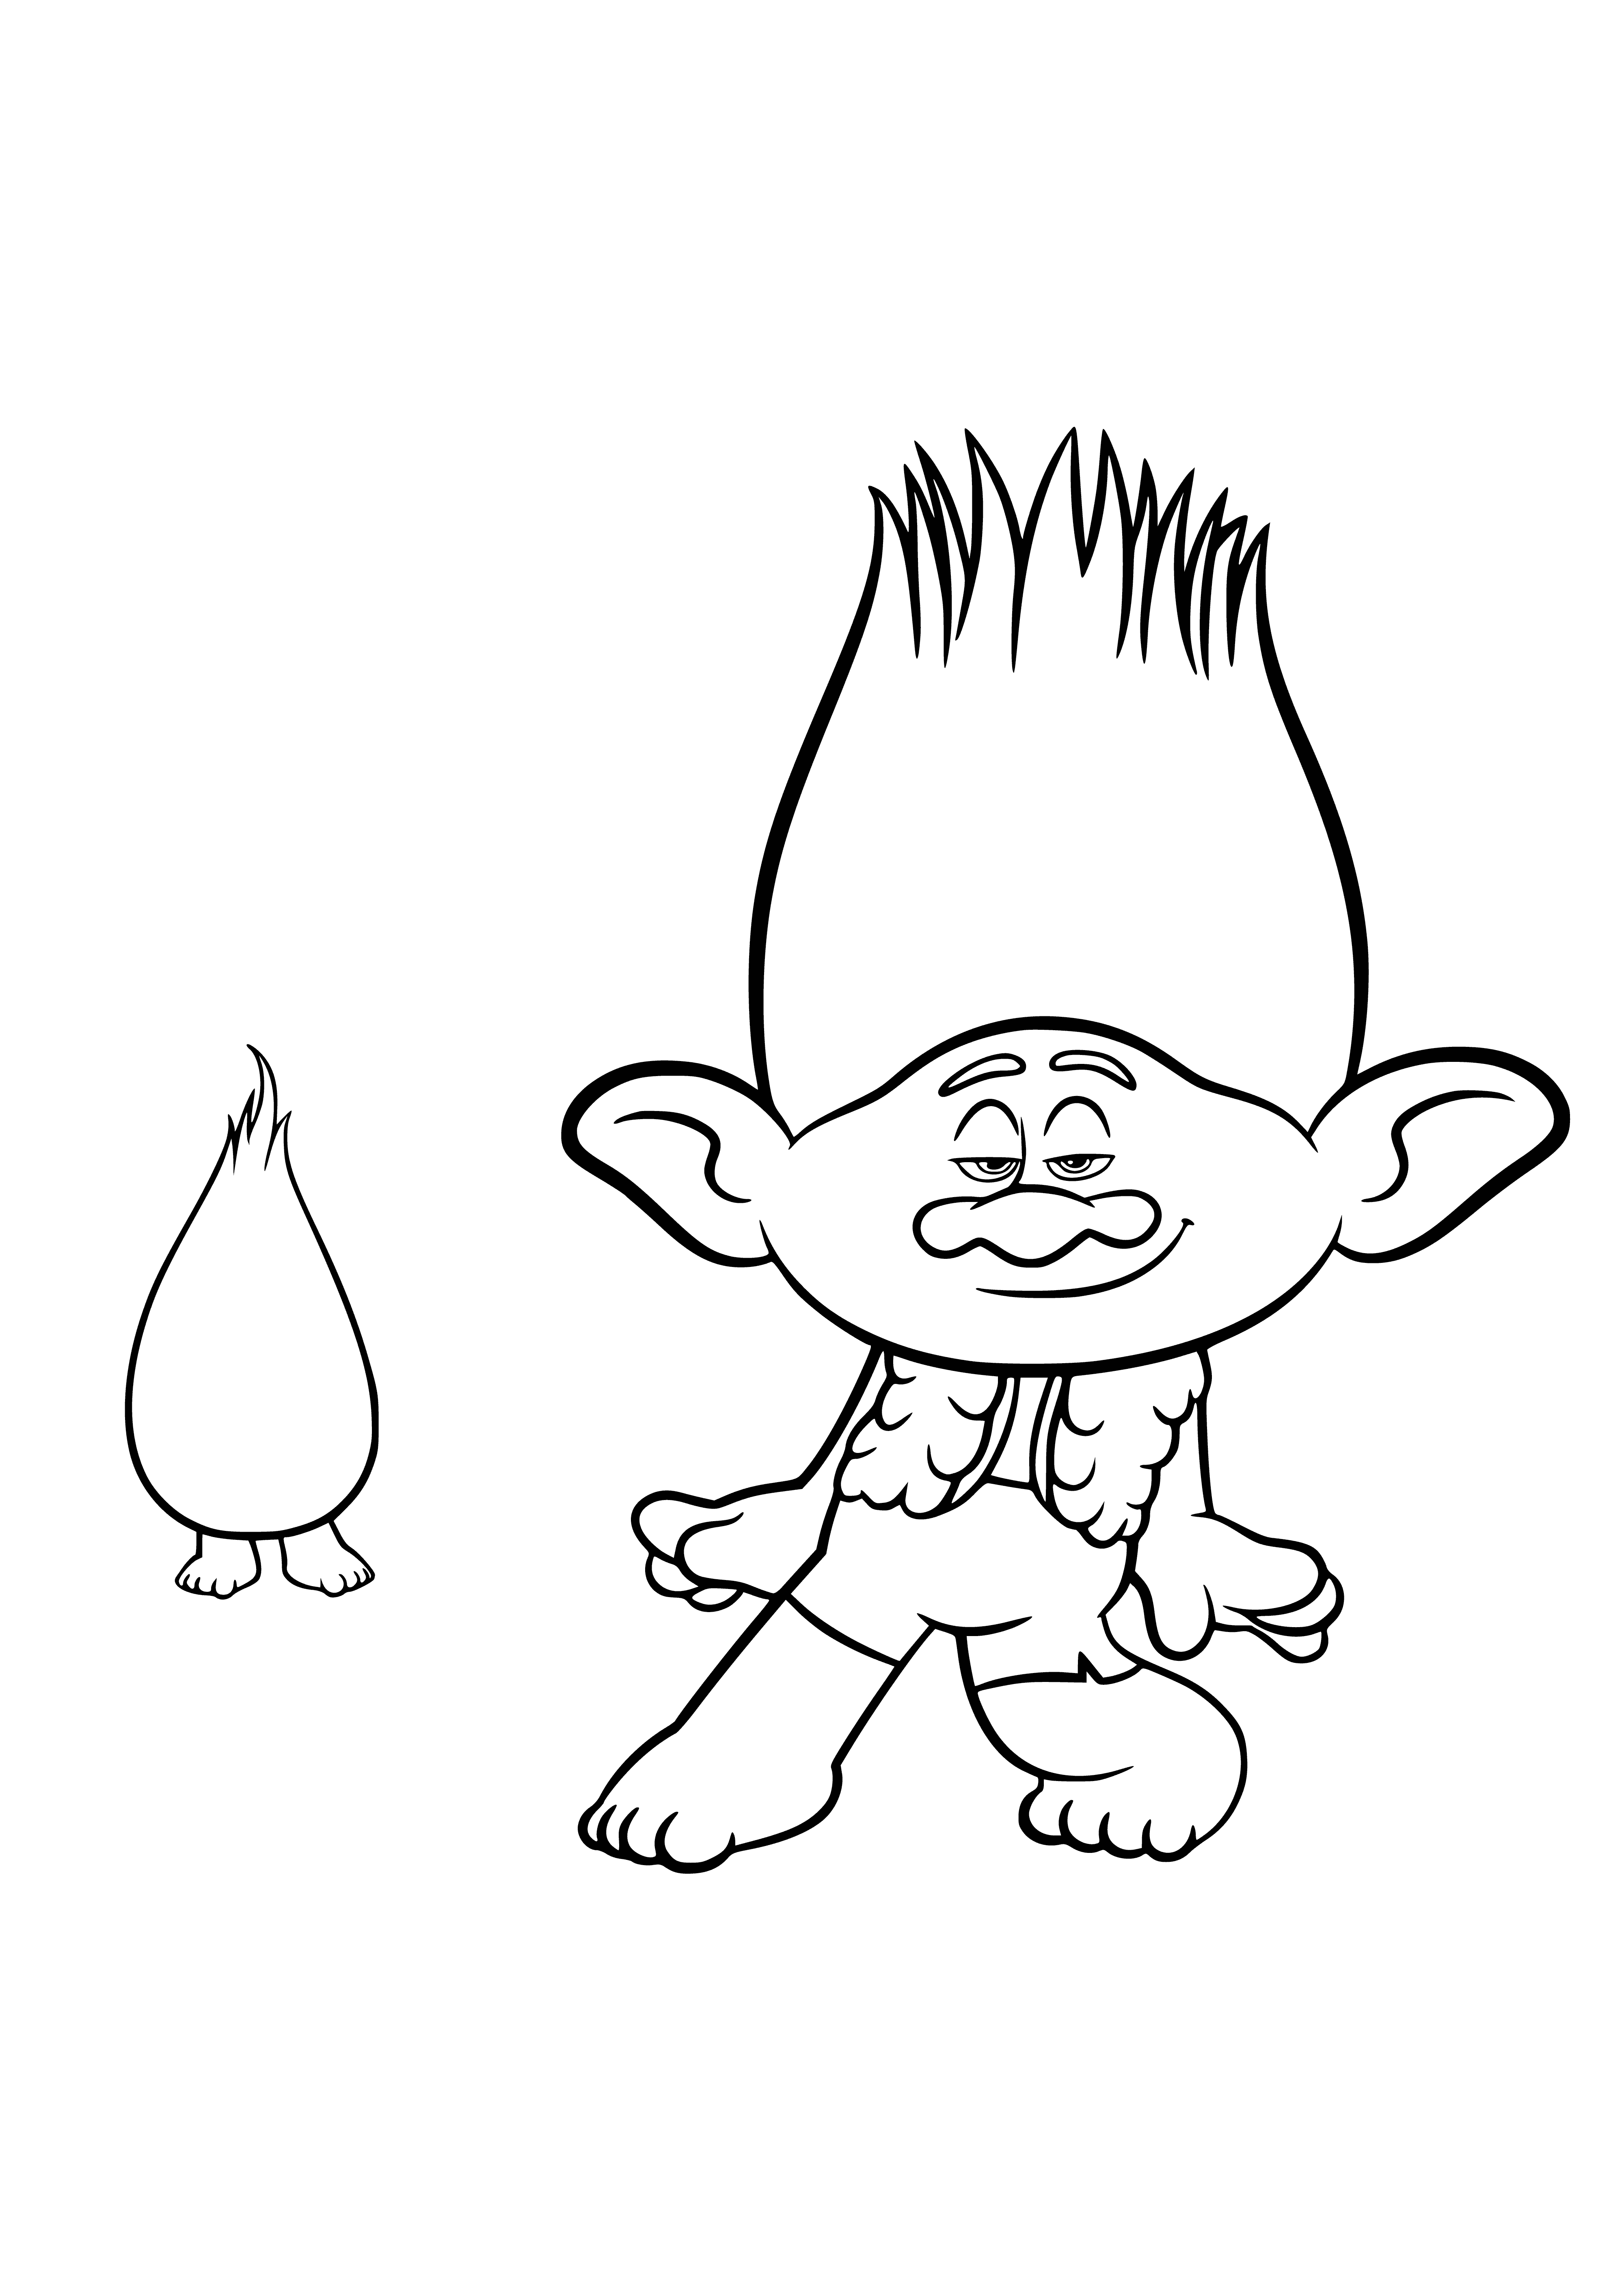 coloring page: Two trolls in coloring page with different colored skin, eyes, hair. Both smiling. #trolls #coloringpages